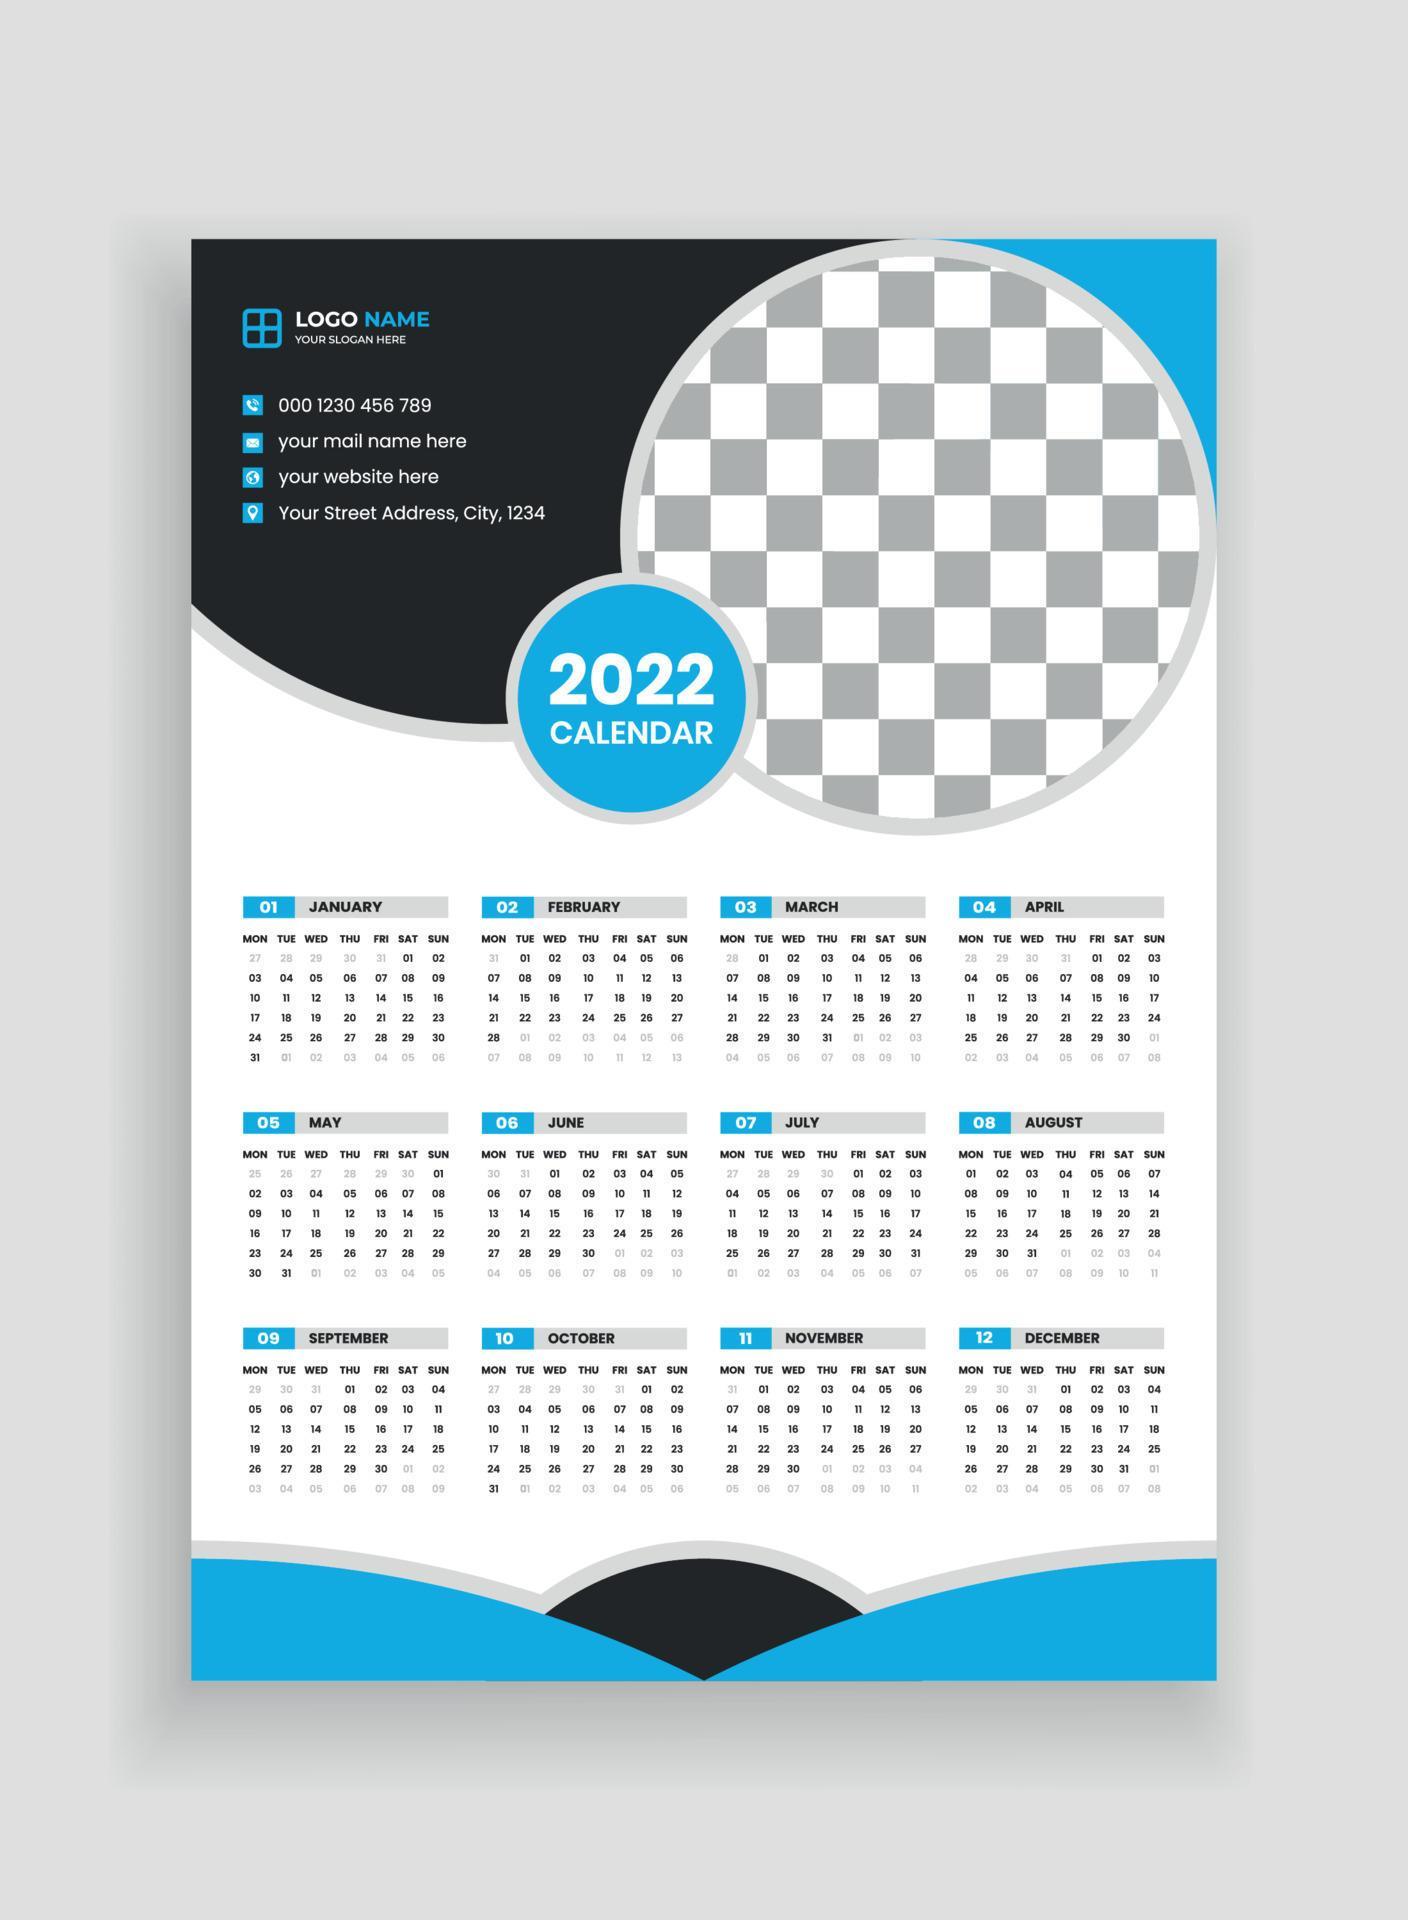 Free 2022 Wall Calendar By Mail One Page Wall Calendar Design 2022. Wall Calendar Design 2022. New Year  Calendar Design 2022. Week Starts On Monday. Template For Annual Calendar  2022 3528113 Vector Art At Vecteezy